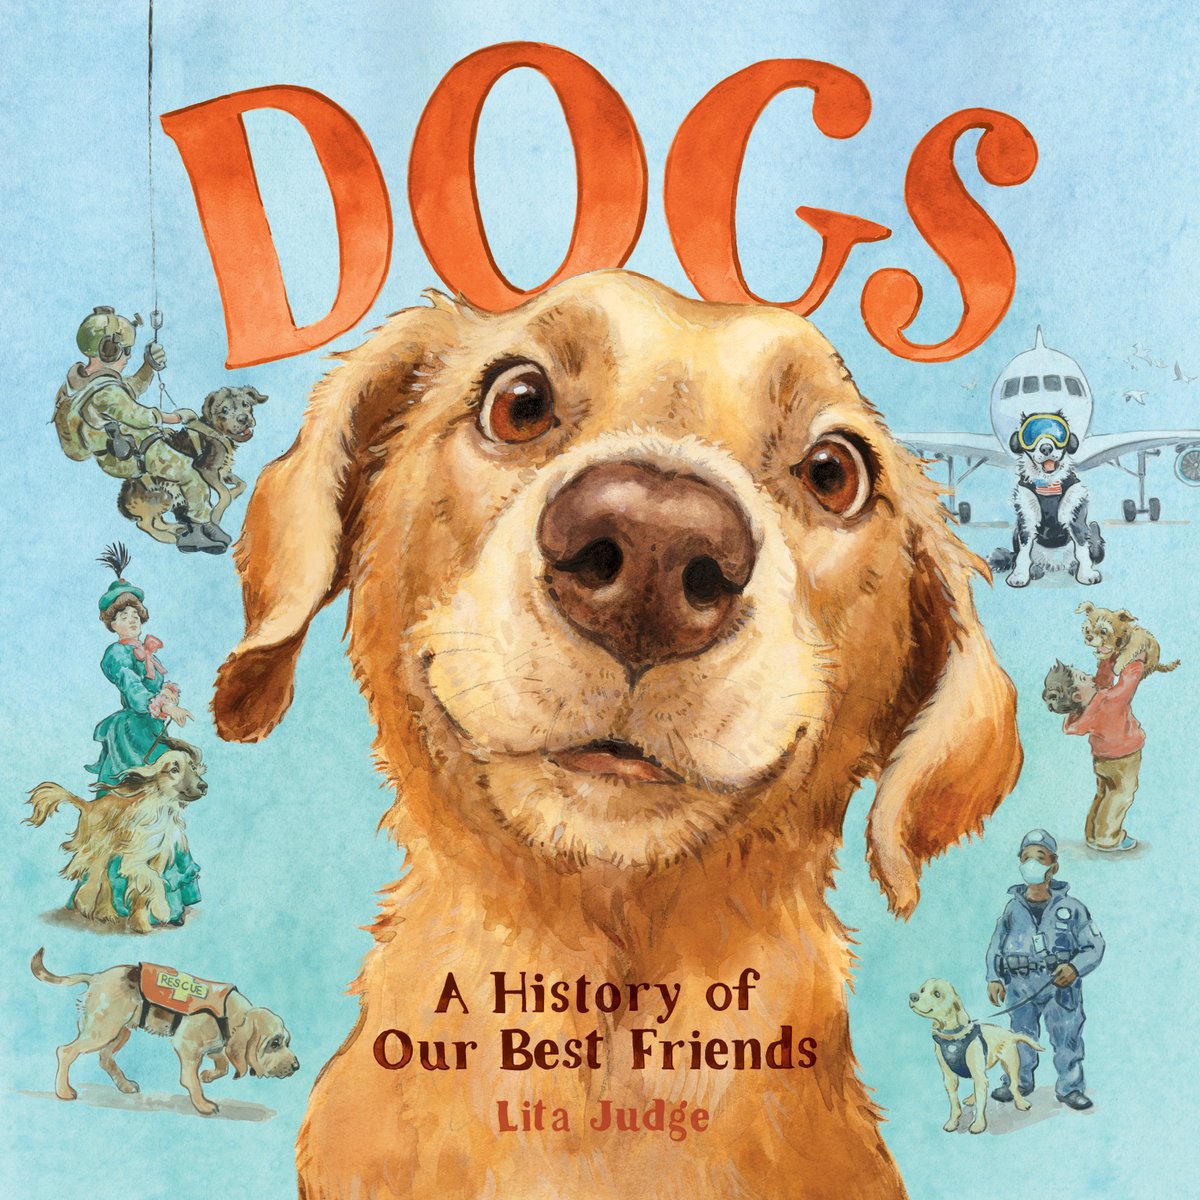 From award-winning author-illustrator @LitaJudge, comes a beautifully illustrated history of how humans’ partnership with dogs changed our lives and theirs. On sale now! Grab a copy today for the dog lover in your life! #DogsAHistory #BookBirthday bit.ly/43ESFuM